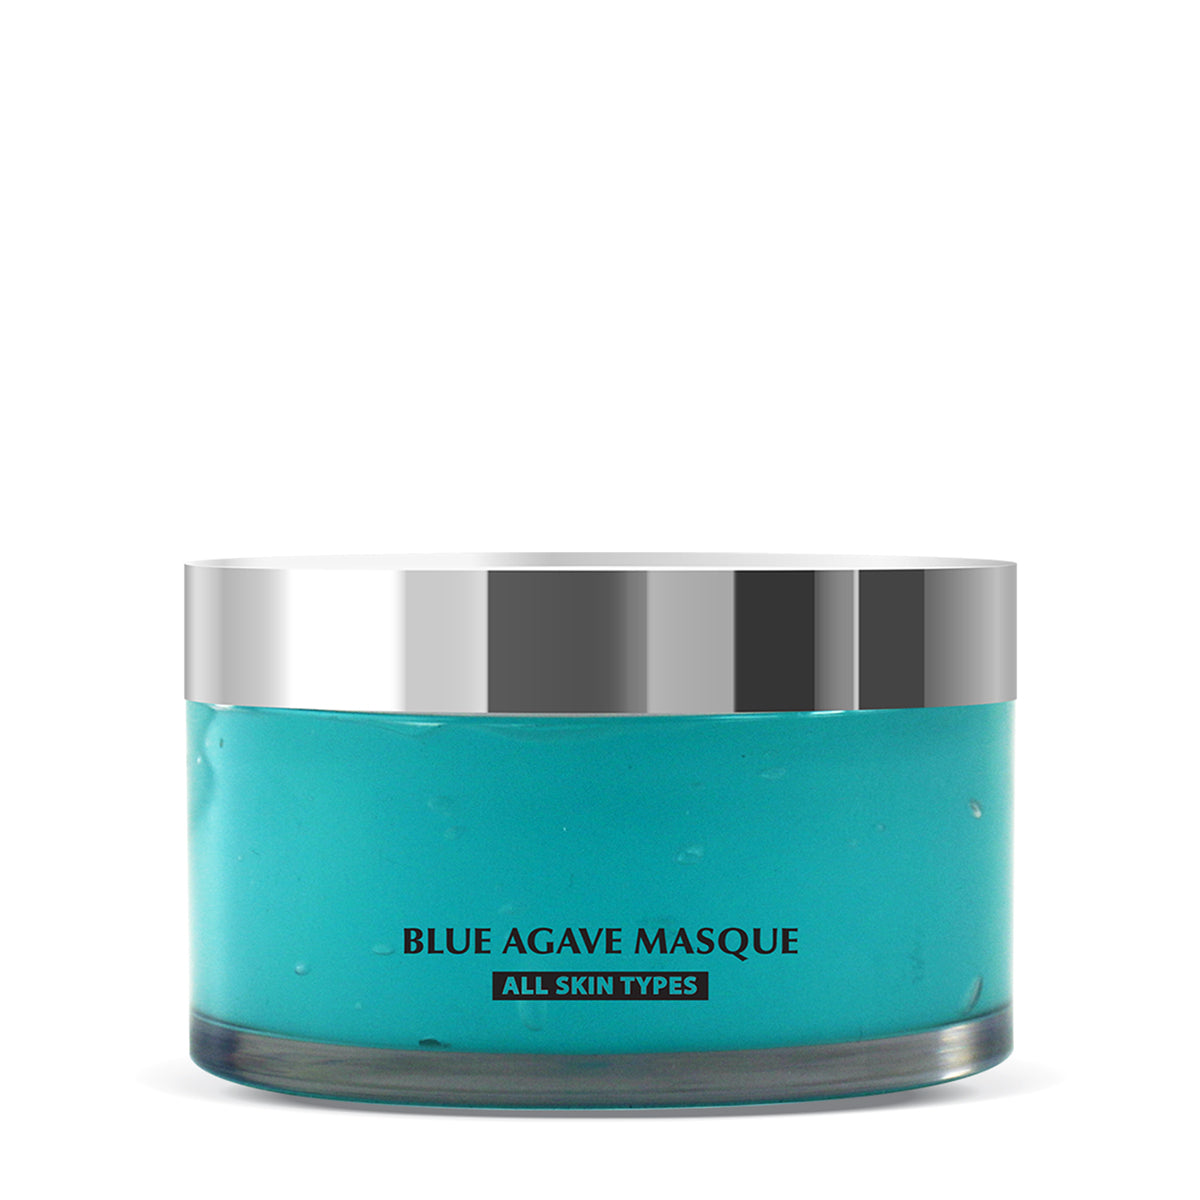 Blue Agave Masque